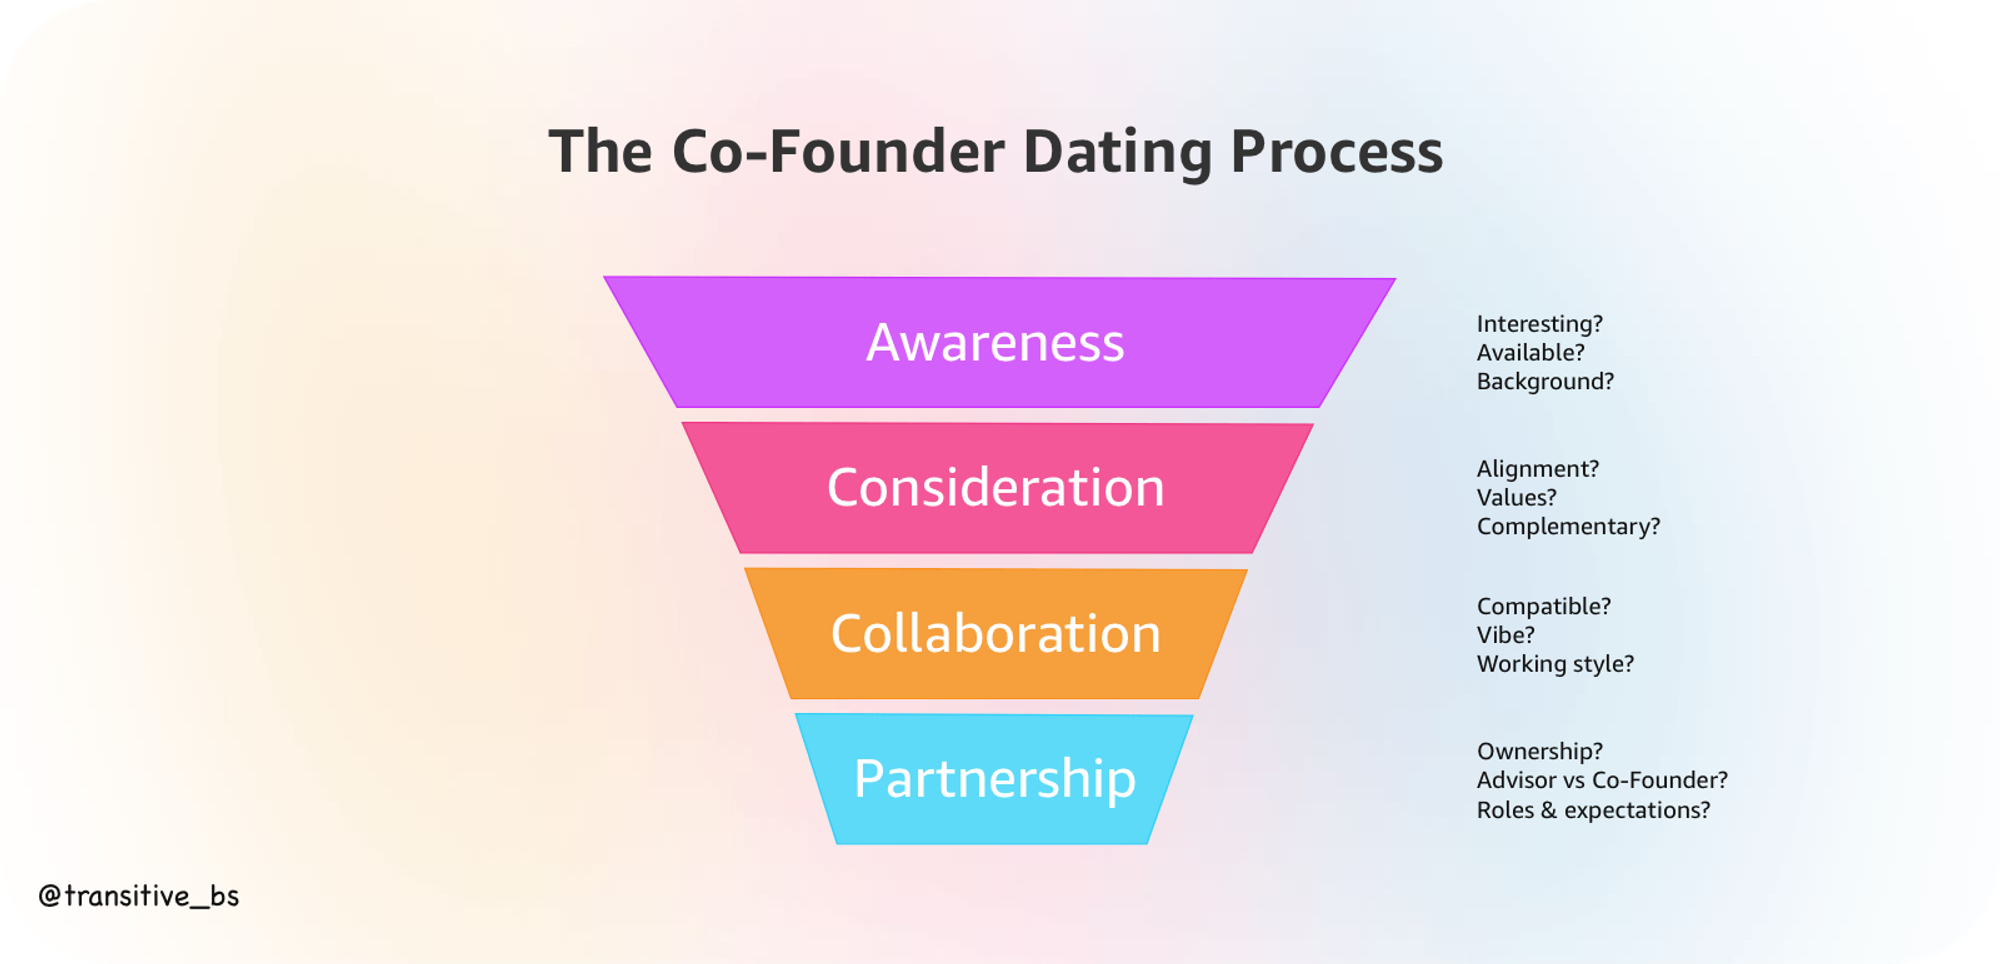 A refresher on the four phases of the co-founder dating process.